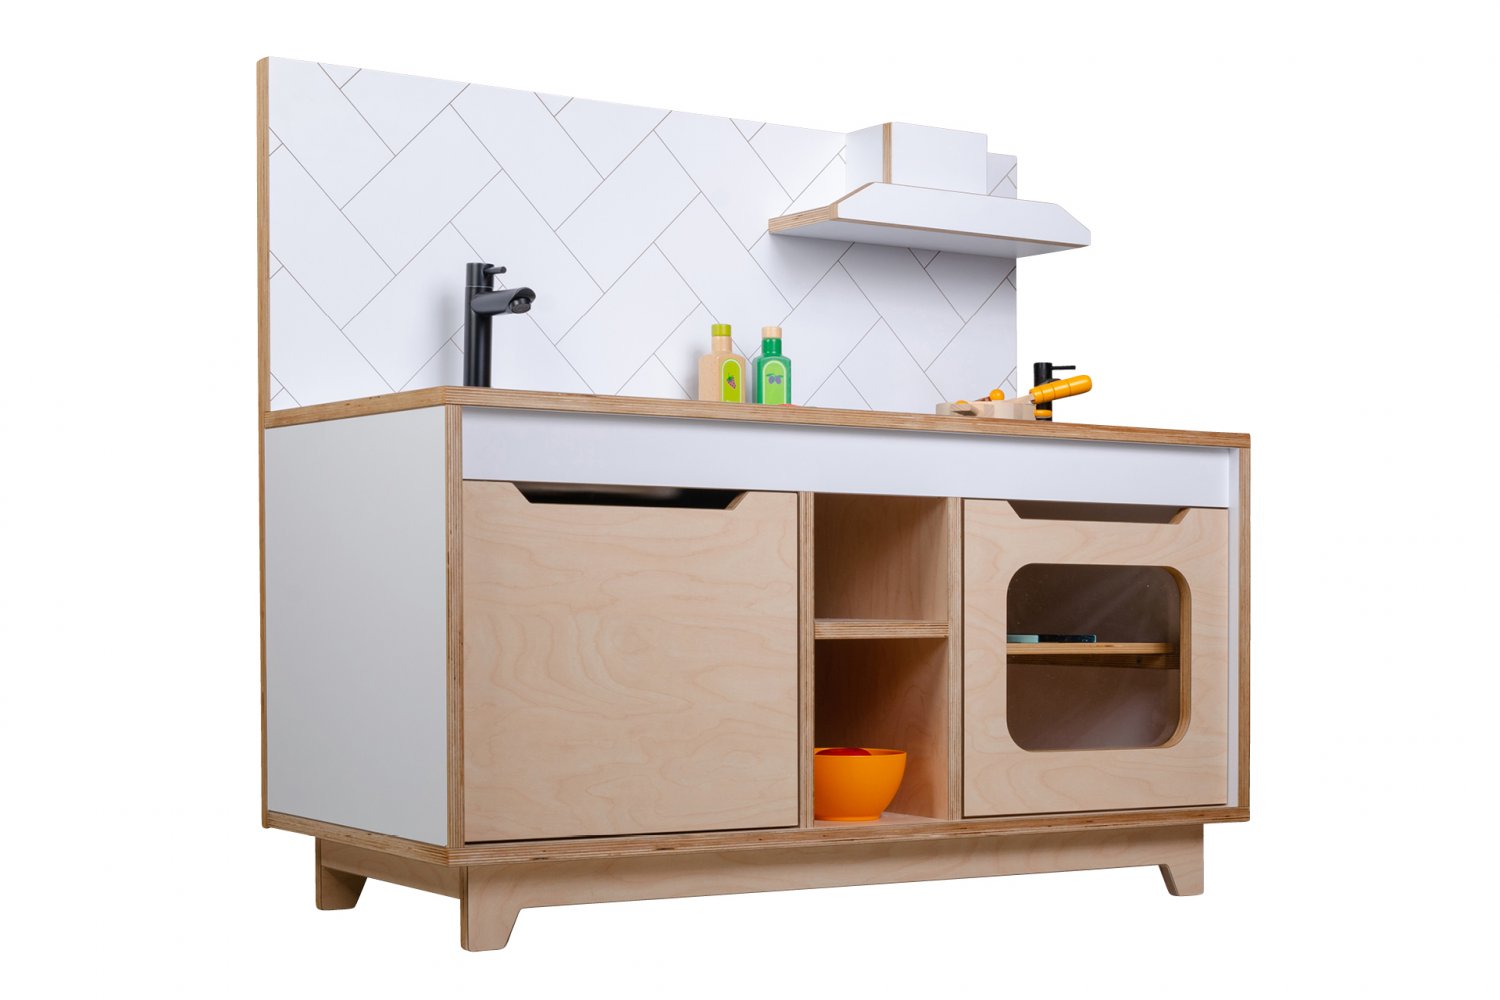 Wooden Plywood Kitchen for early learning WHITE